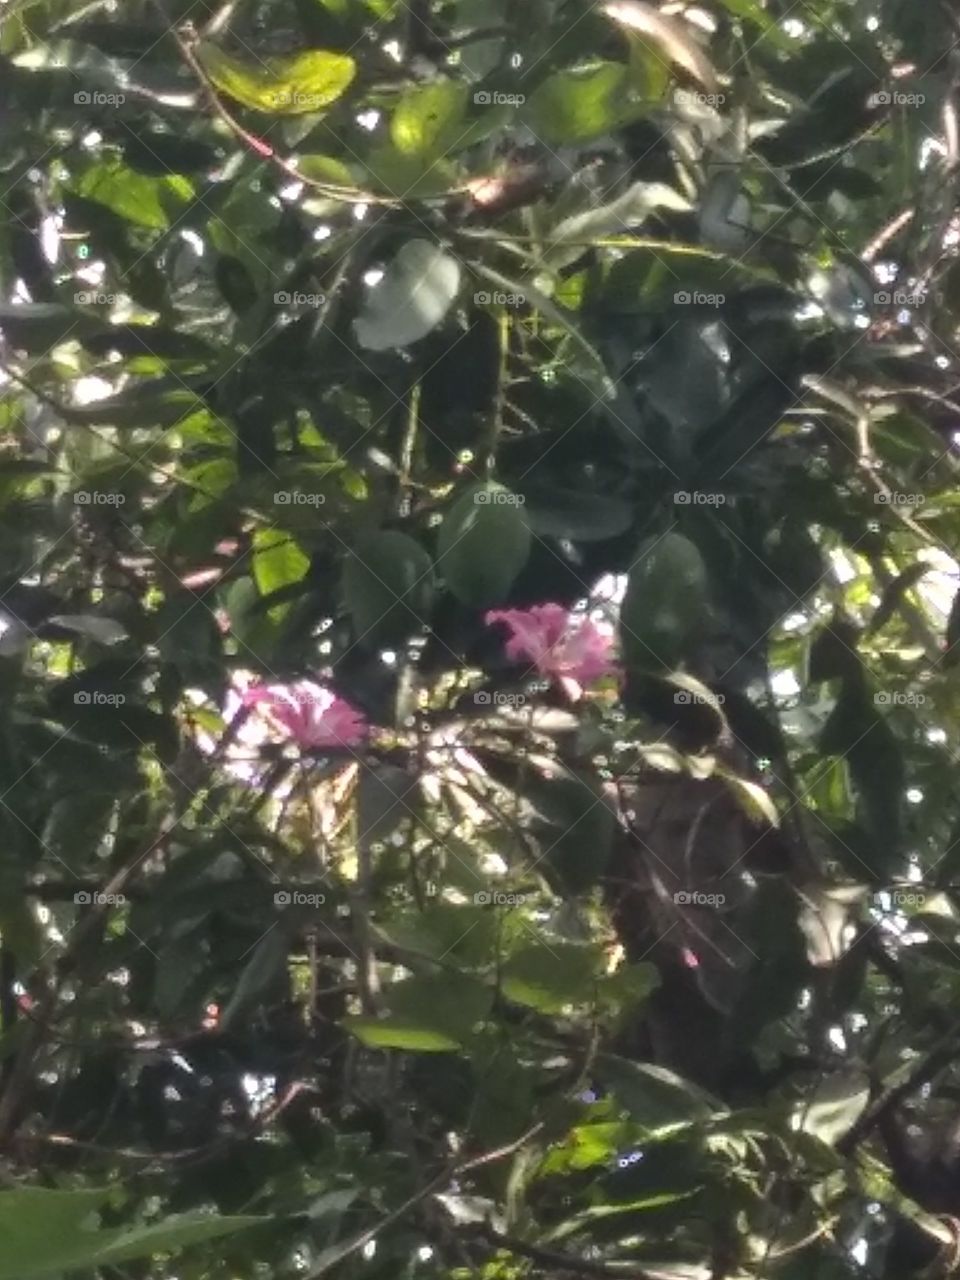 Mangoes and flowers